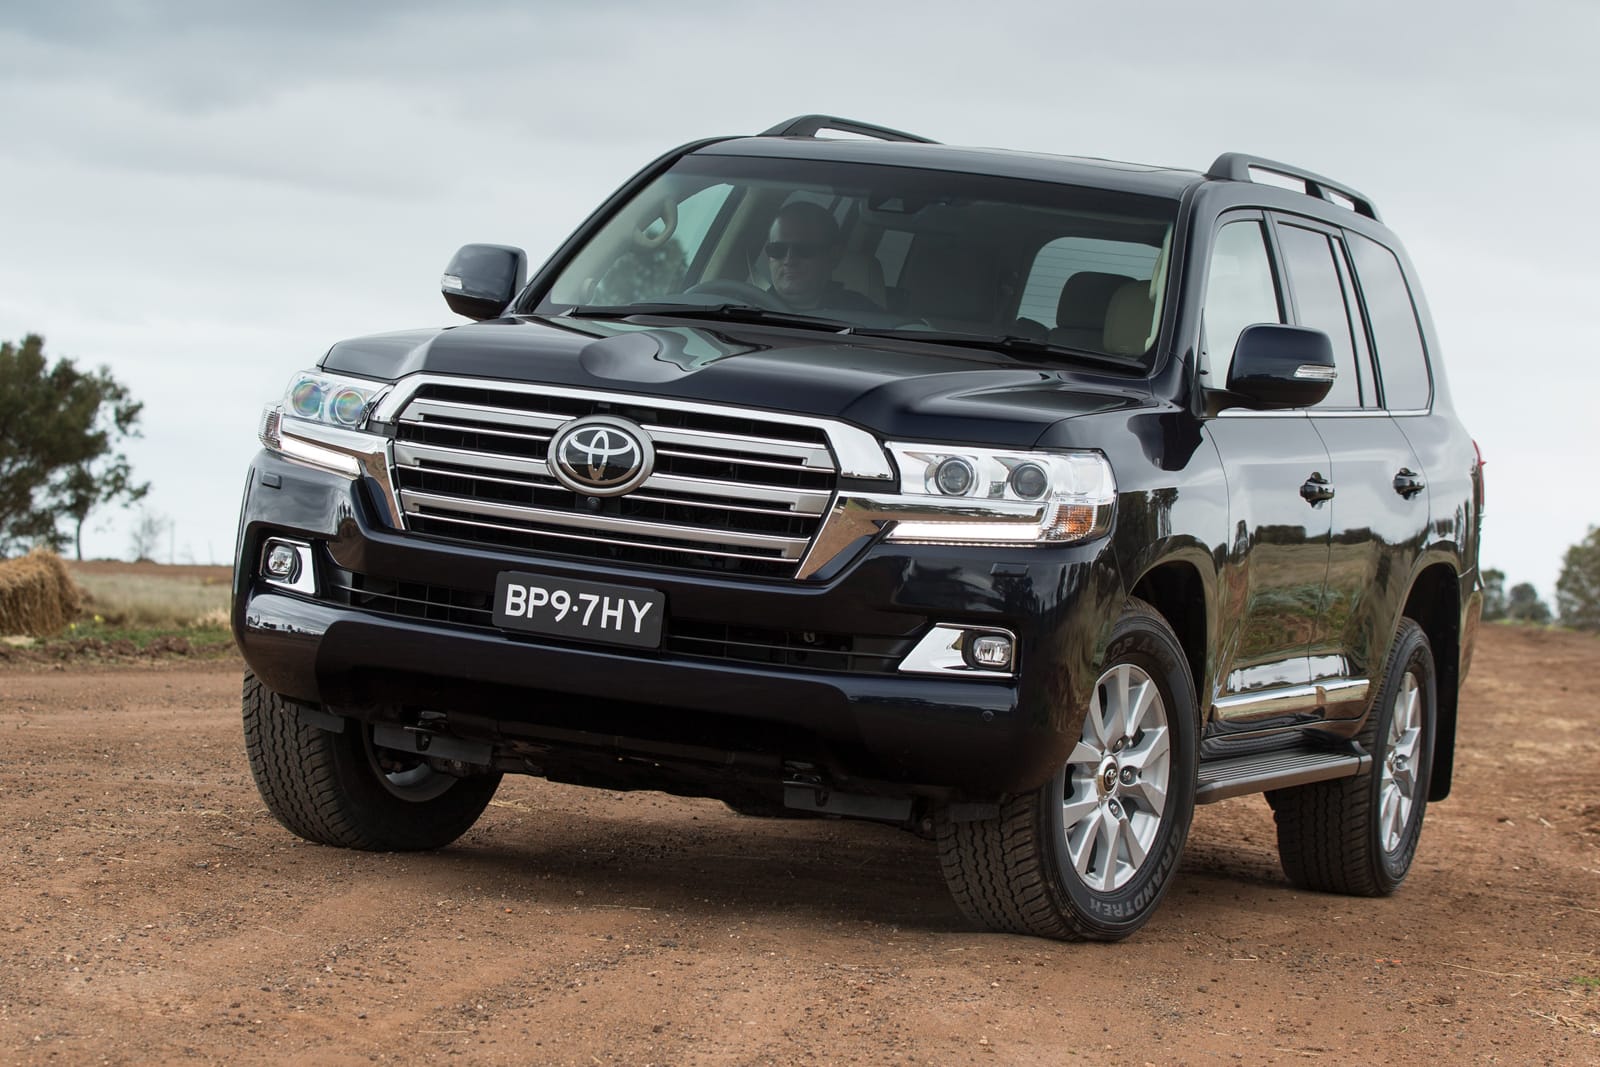 Updated LandCruiser 200 Series due in October. (Pre-production Sahara model shown).